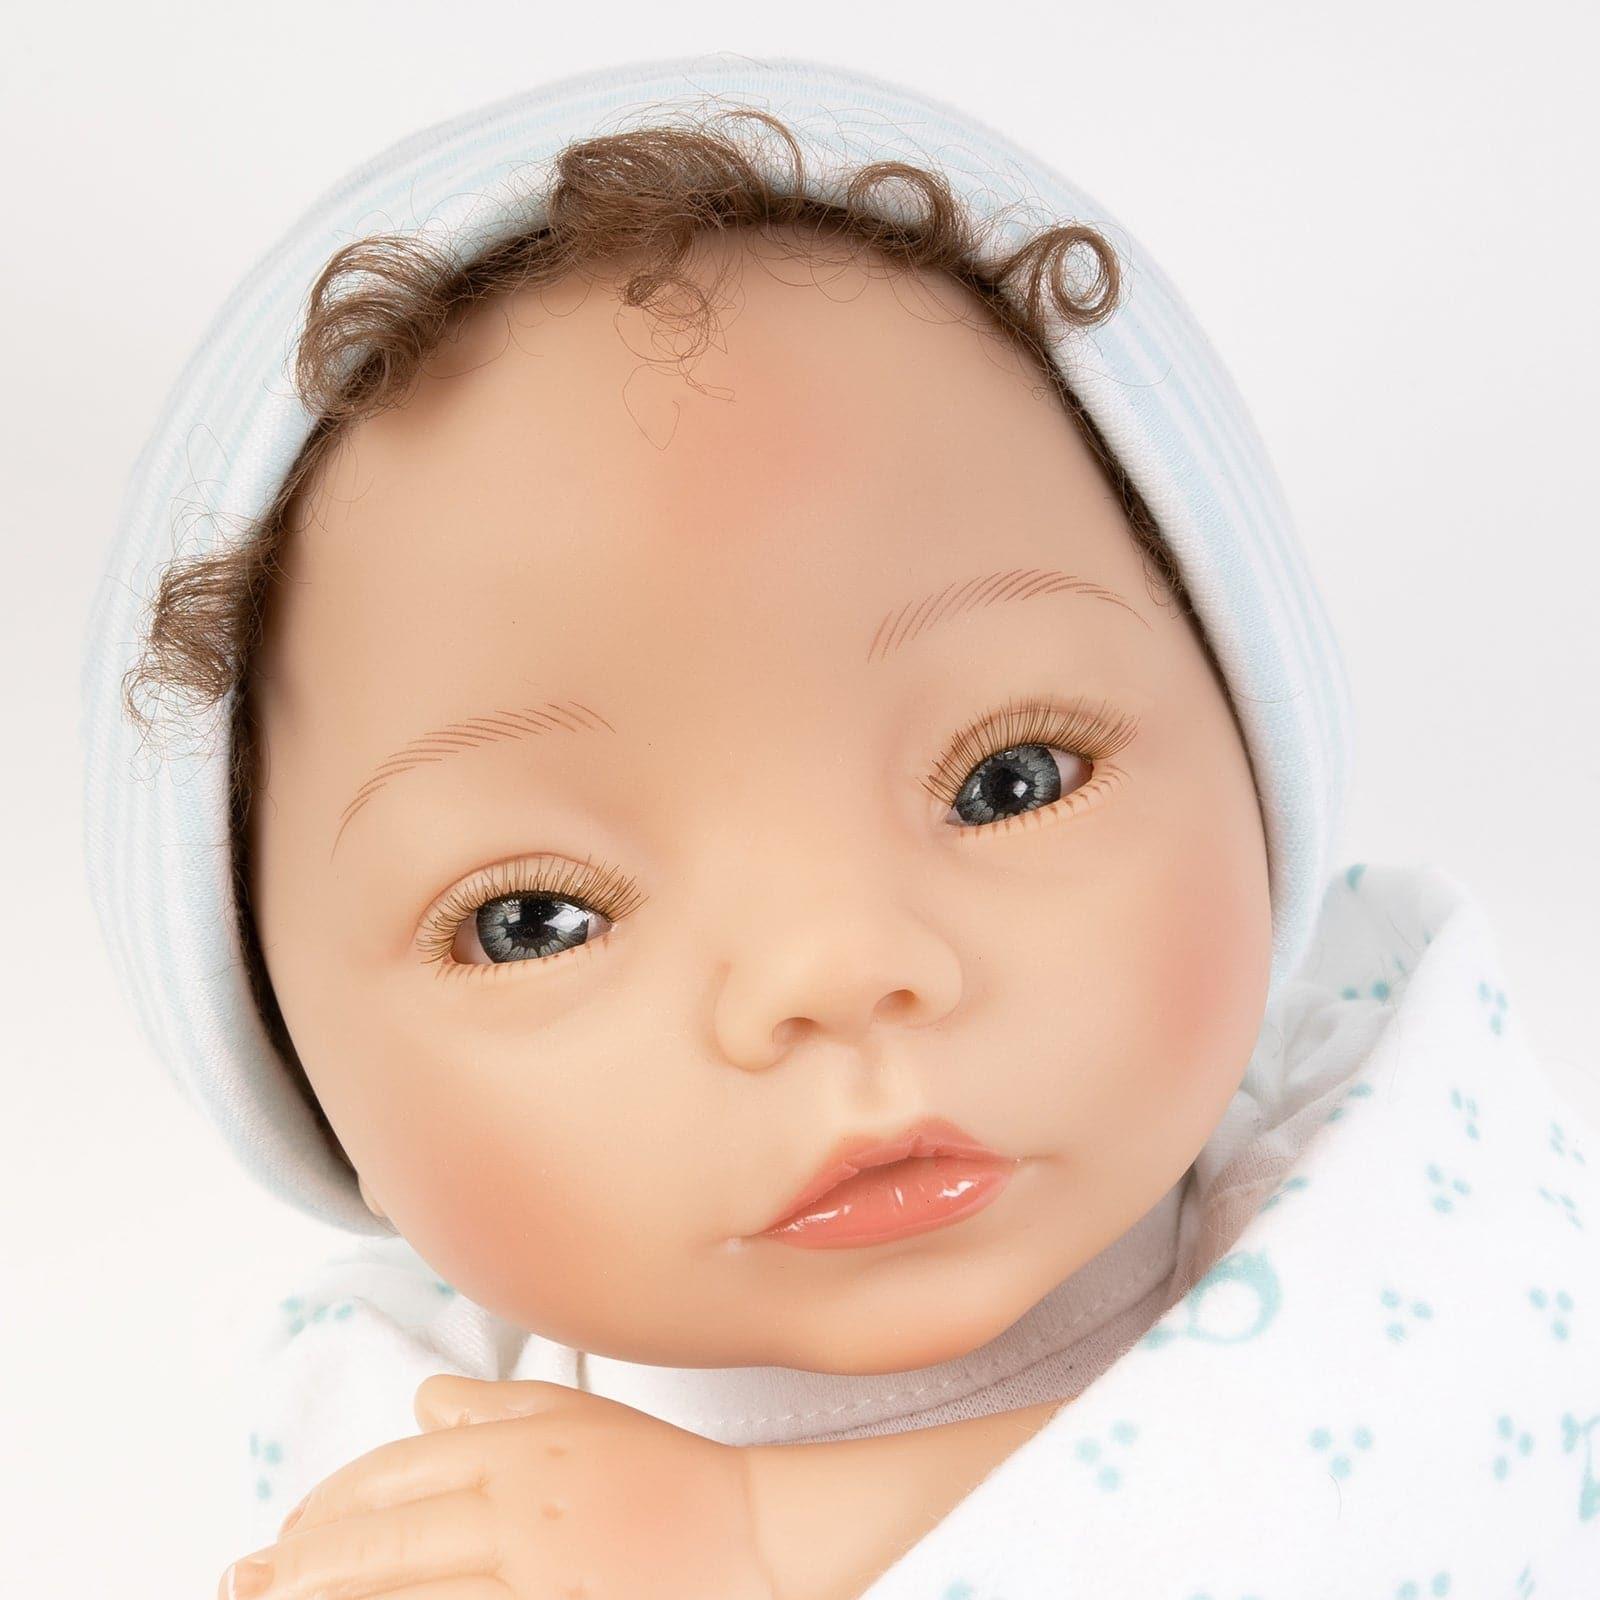 Paradise Galleries Premie Boy Doll - Forever Yours Miracle, 3+